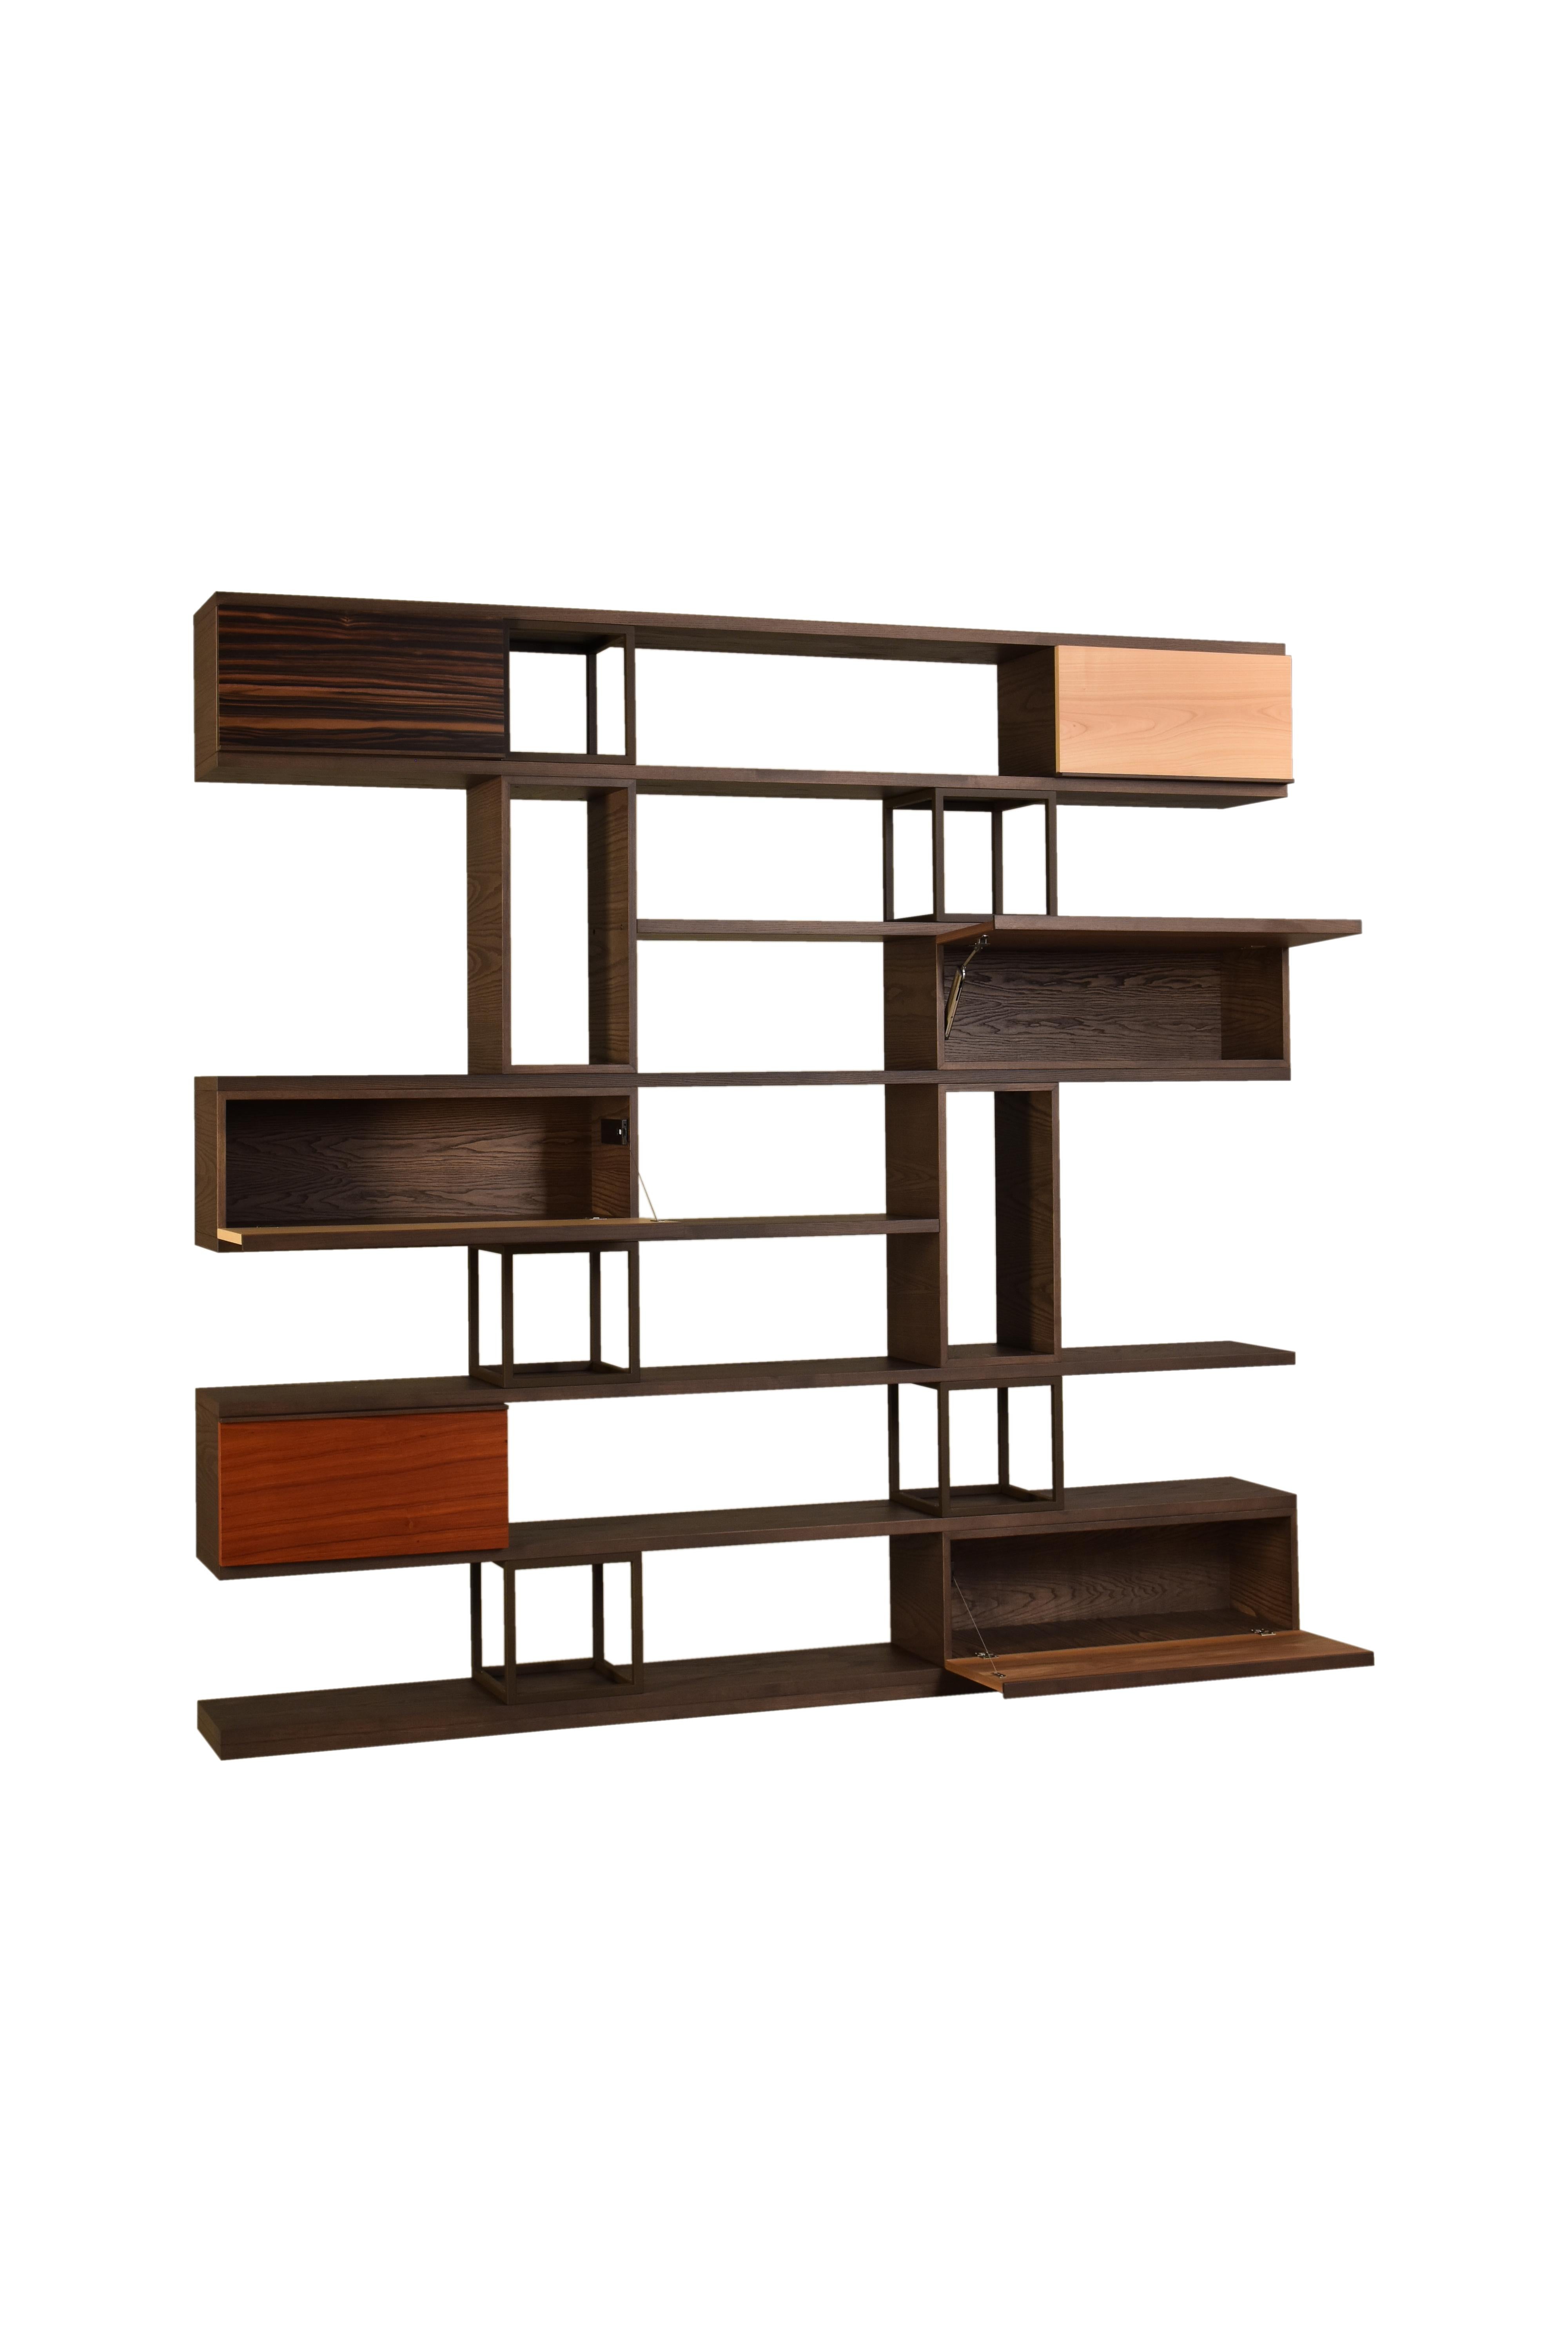 Contemporary style open bookcase, with shelves and modular elements made of ashwood
The structure is supported by varnished metal empty cubes
Available in different color combinations
(shipped disassembled or in 2 pieces)
Designed by Libero Rutilo